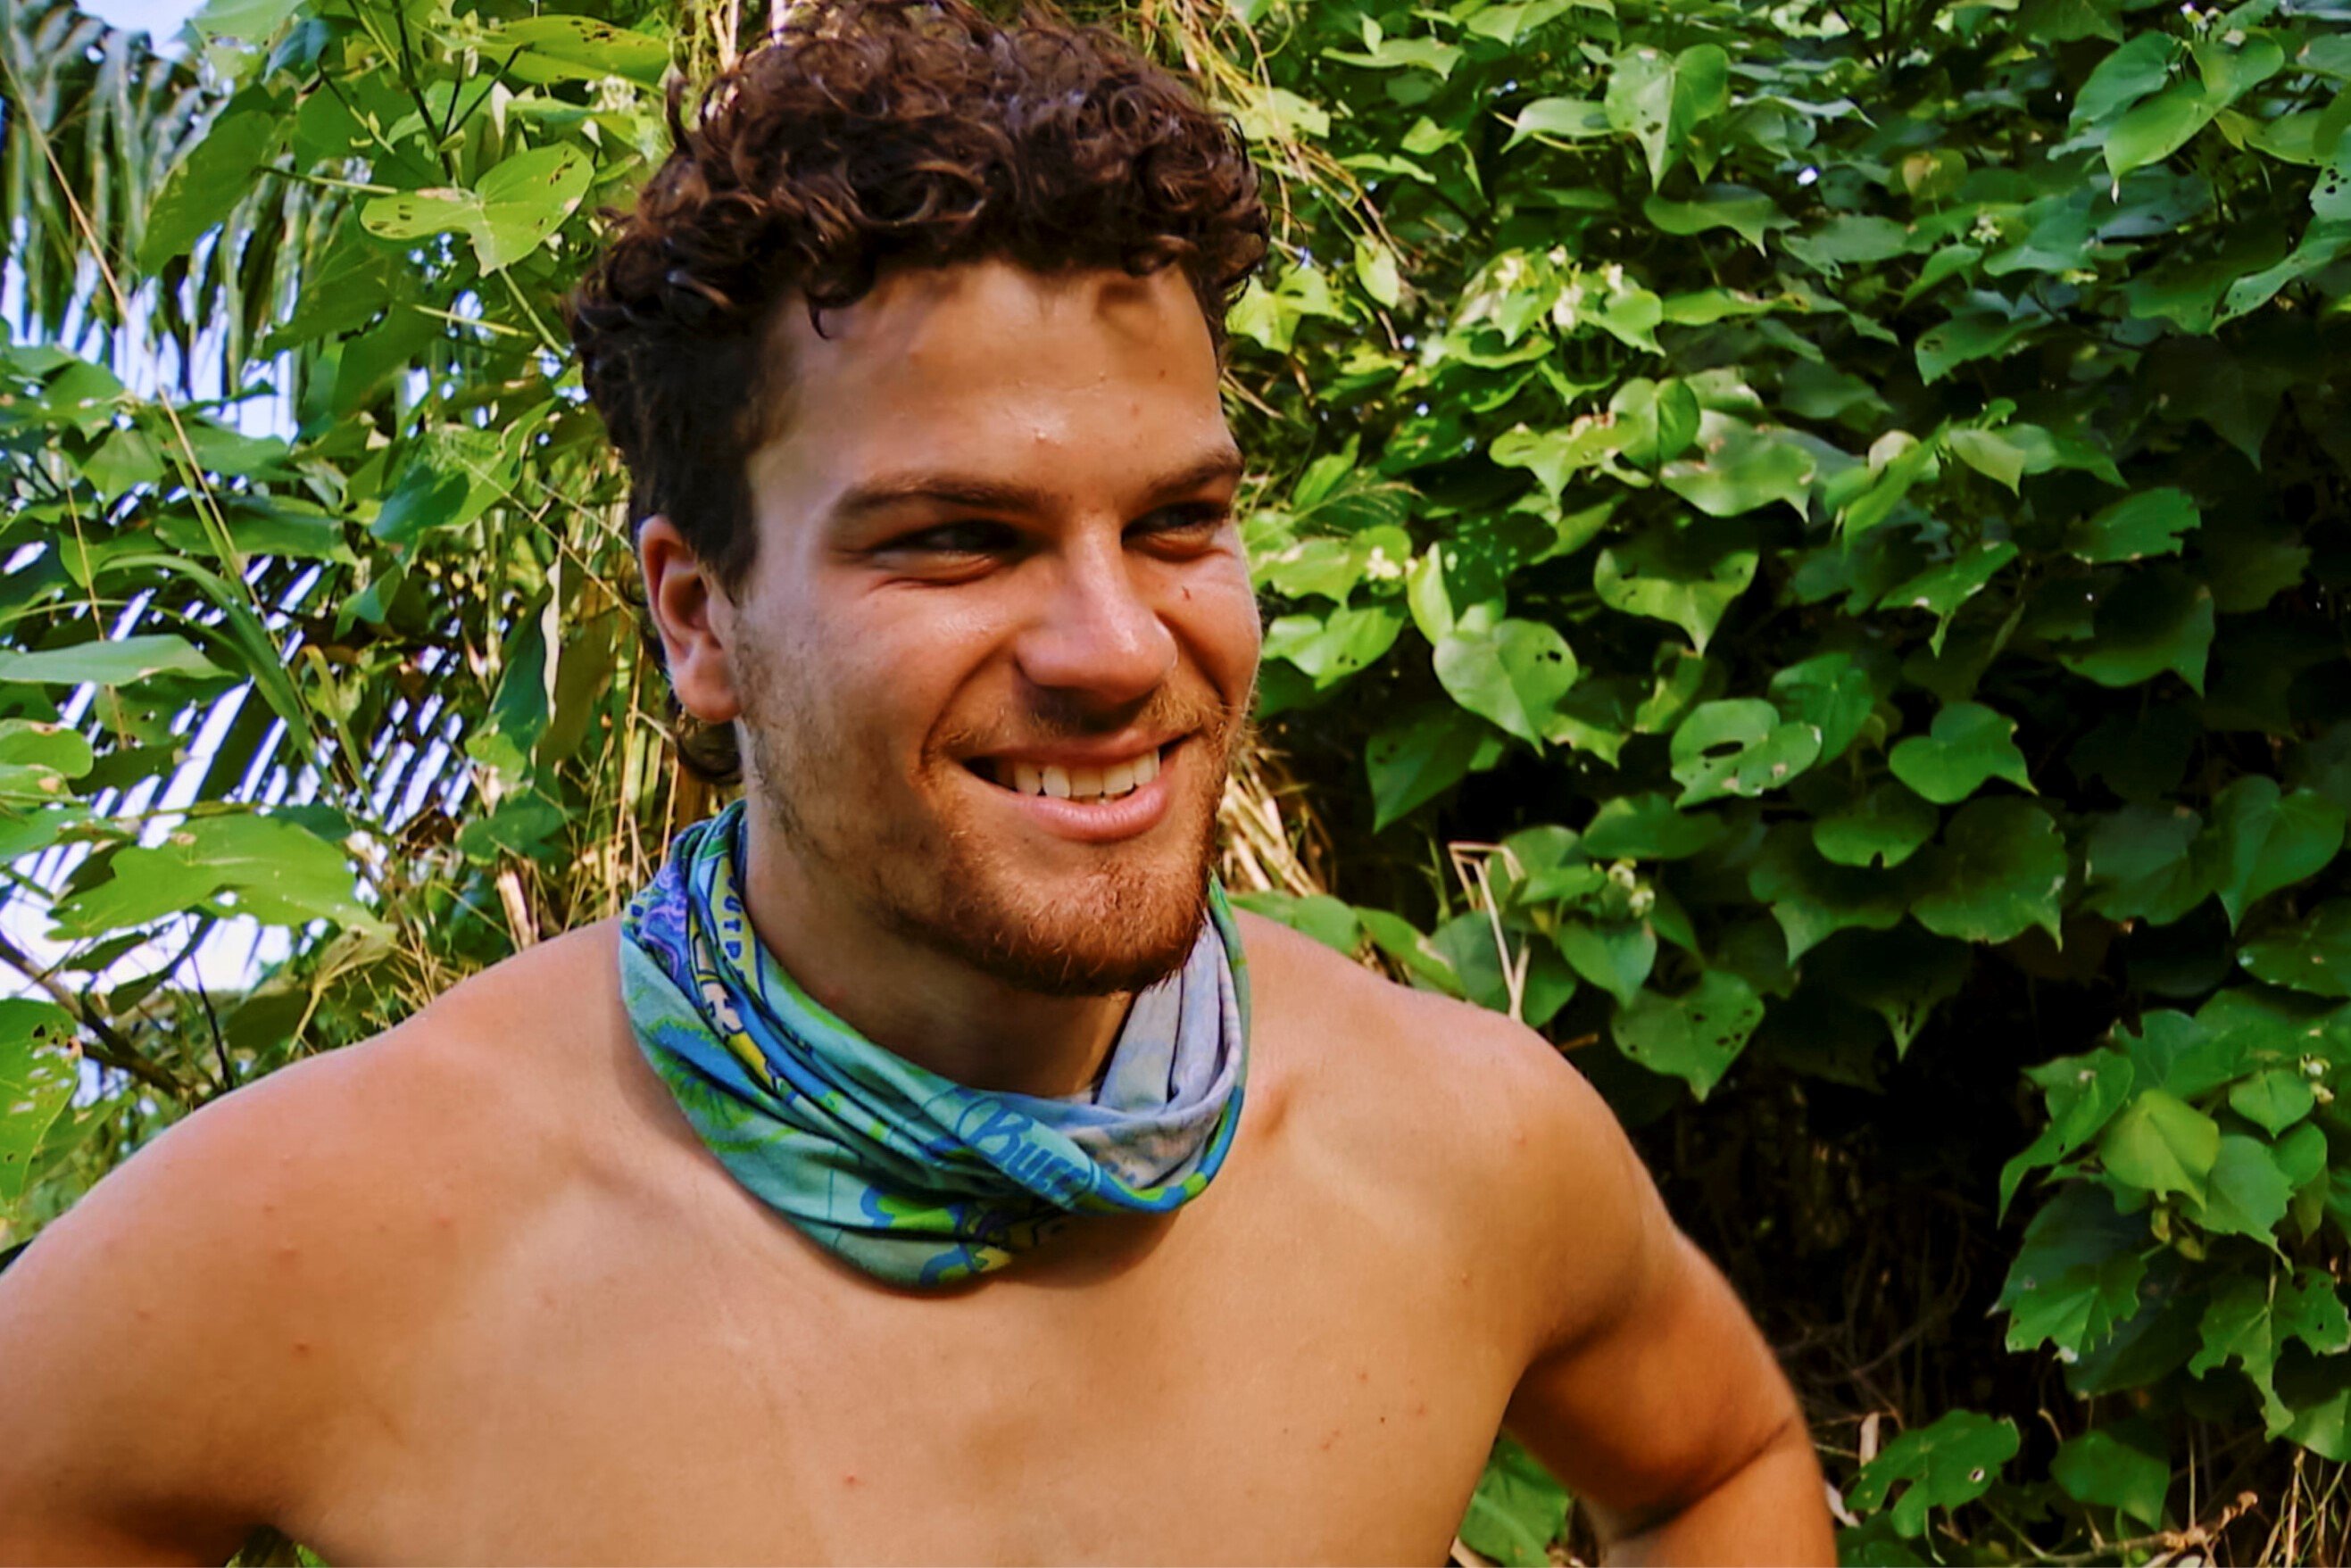 Survivor 1 Castaway Reveals The Camera Screws With Players Searching For Idols 